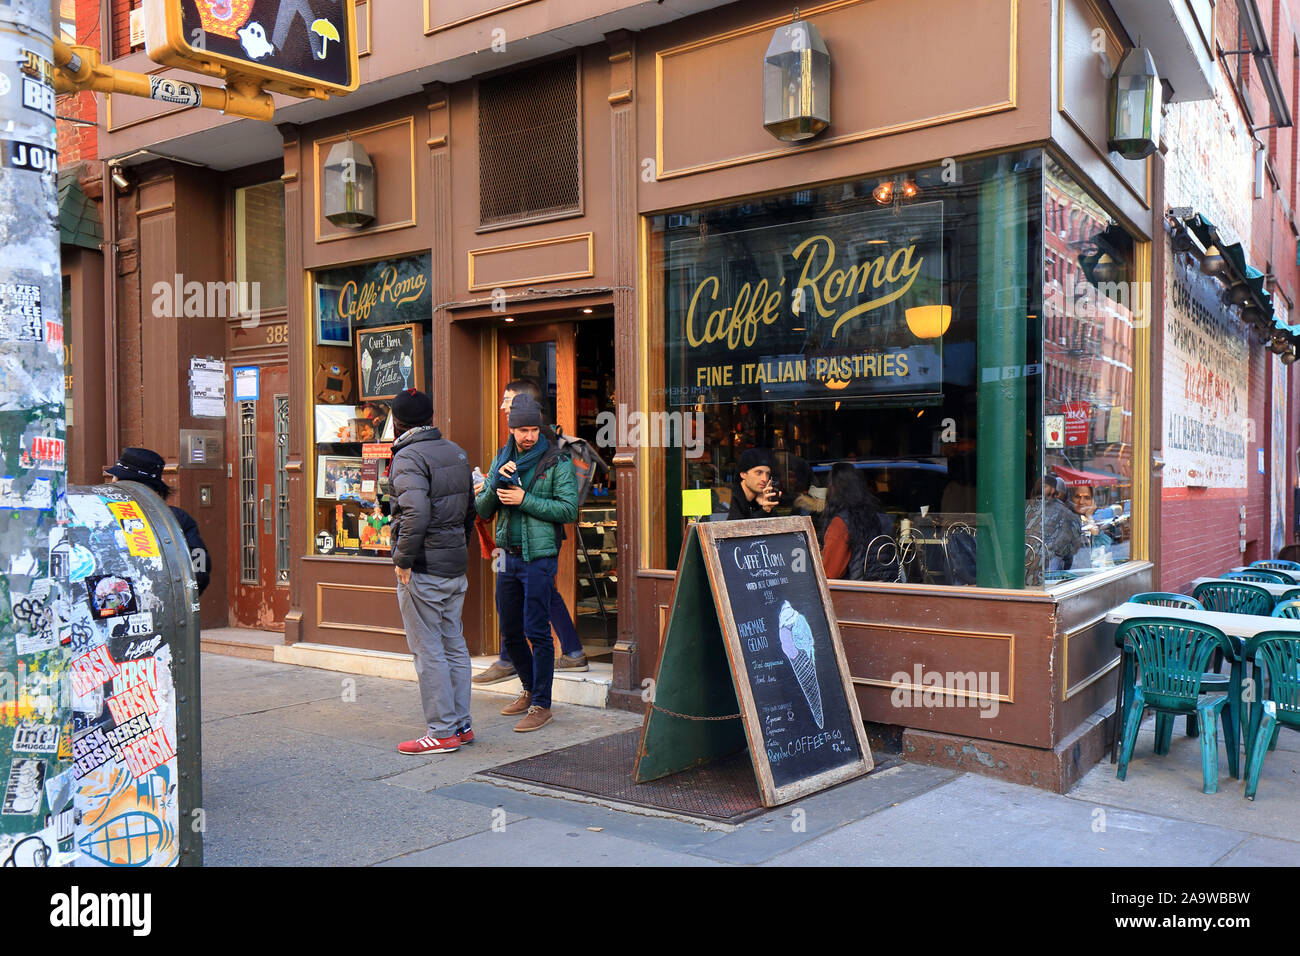 https://c8.alamy.com/comp/2A9WBBW/caffe-roma-176-mulberry-street-new-york-ny-exterior-storefront-of-an-italian-pastry-shop-in-the-little-italy-neighborhood-of-manhattan-2A9WBBW.jpg